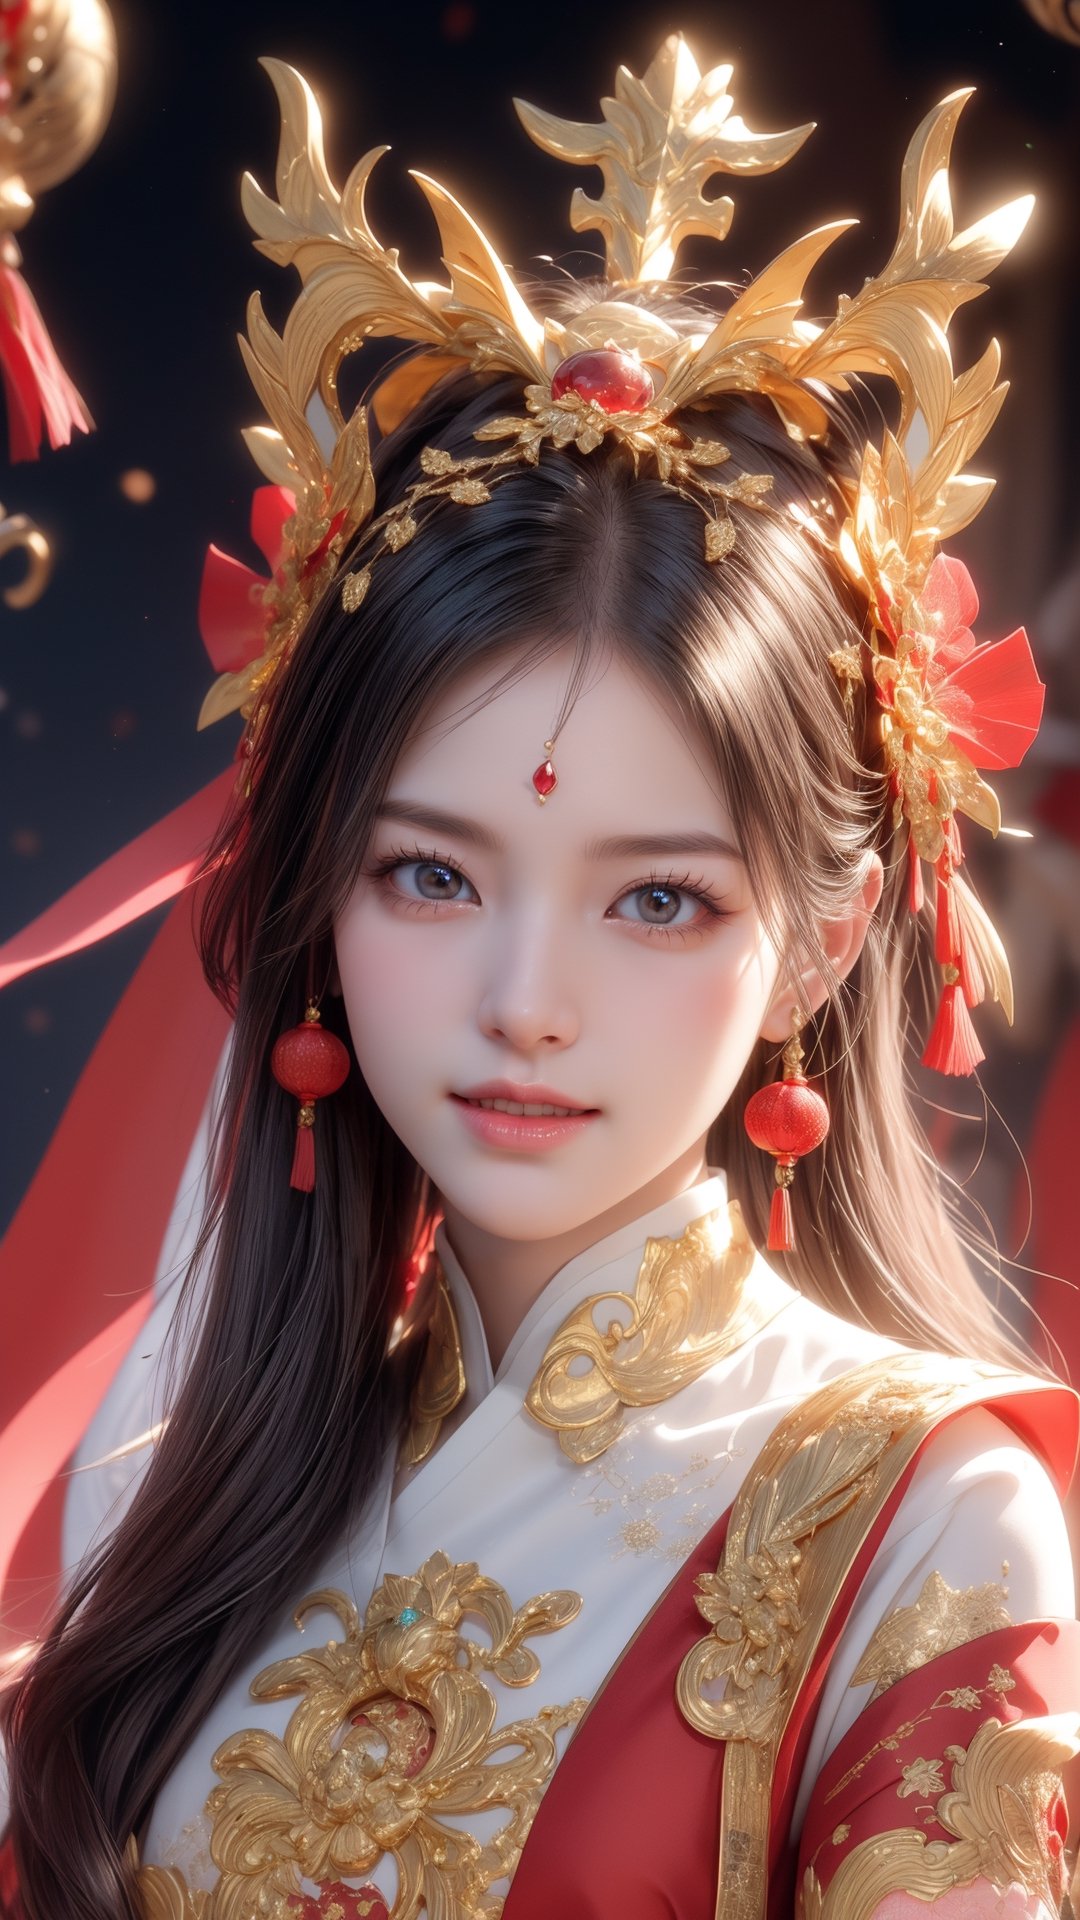 Generate an image with a red background, featuring a pure gold Chinese dragon centered in the picture. Decorate the dragon with Chinese New Year decorations, scatter gemstones, and incorporate a strong sense of light and shadow. Utilize 3D rendering to make the image lifelike. Include other symbols of prosperity and happiness, such as blooming peach blossom and laughing children, and add a graceful lunar rainbow arching across the sky. This is the perfect image for wishing prosperity and good luck in the New Year!